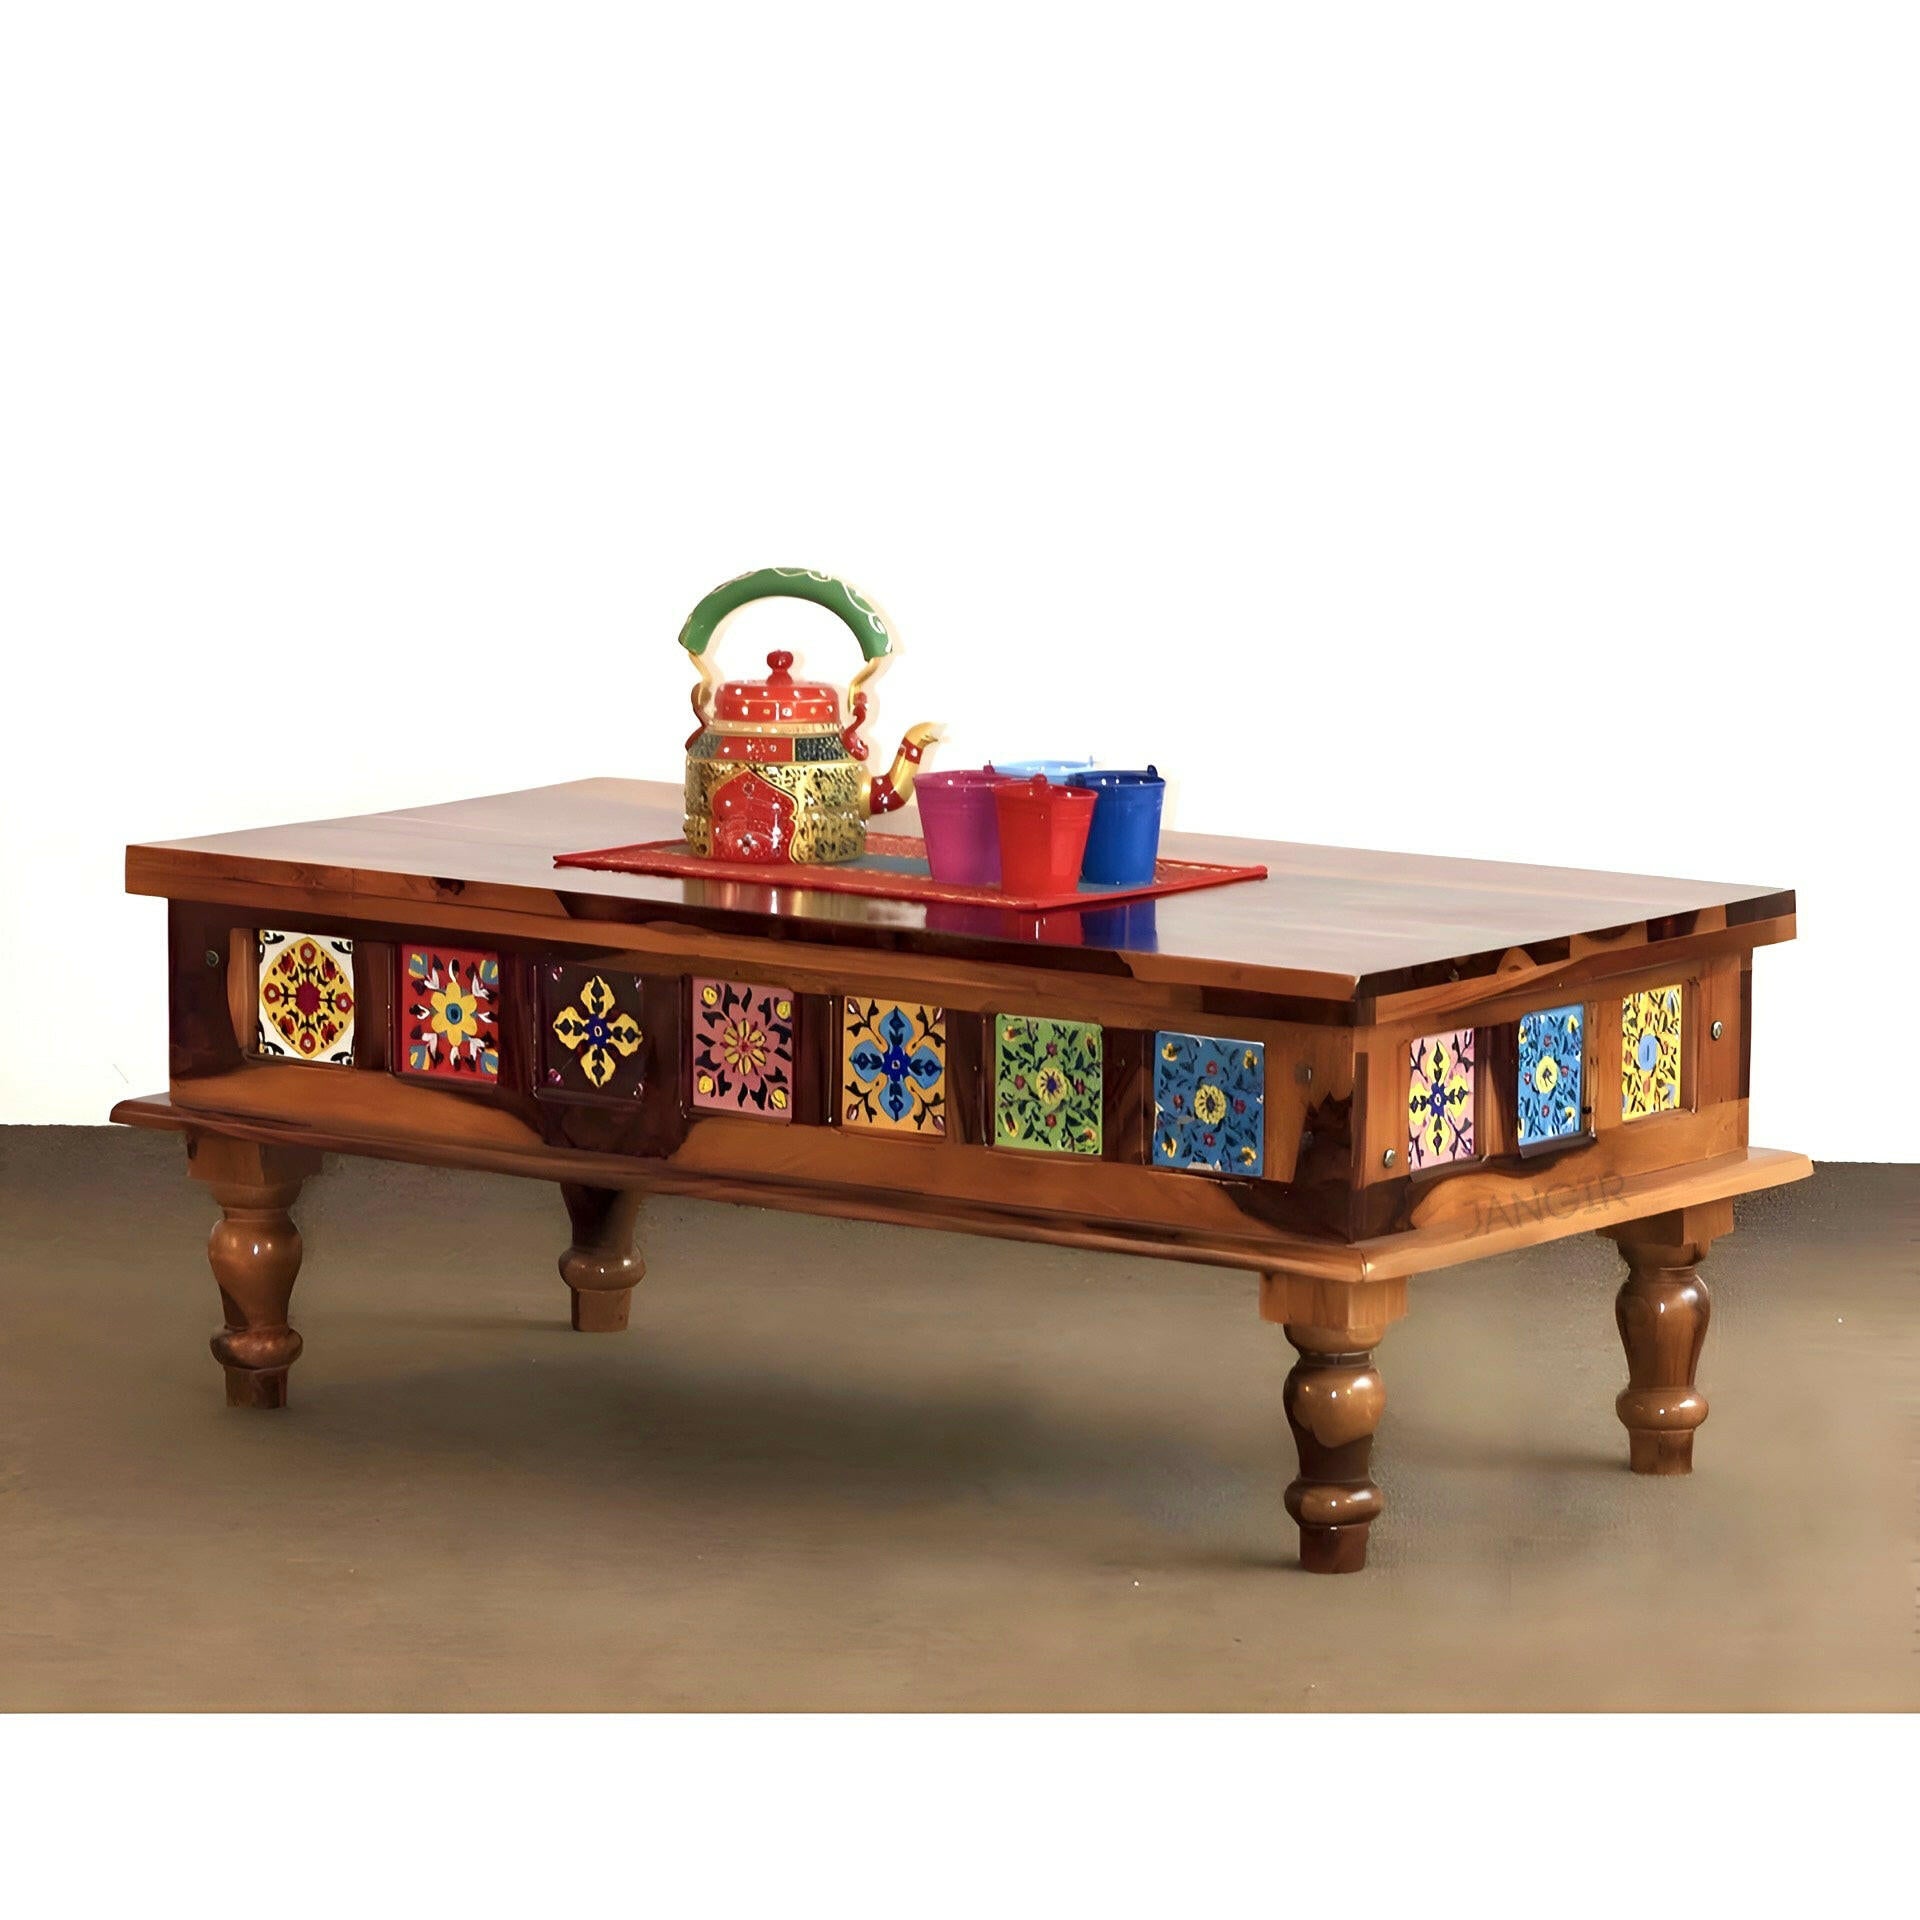 Elevate your living space with stunning sheesham wood coffee tables featuring intricate Rajasthani tile designs. Explore our center table curated selection for a touch of tradition in Bangalore.